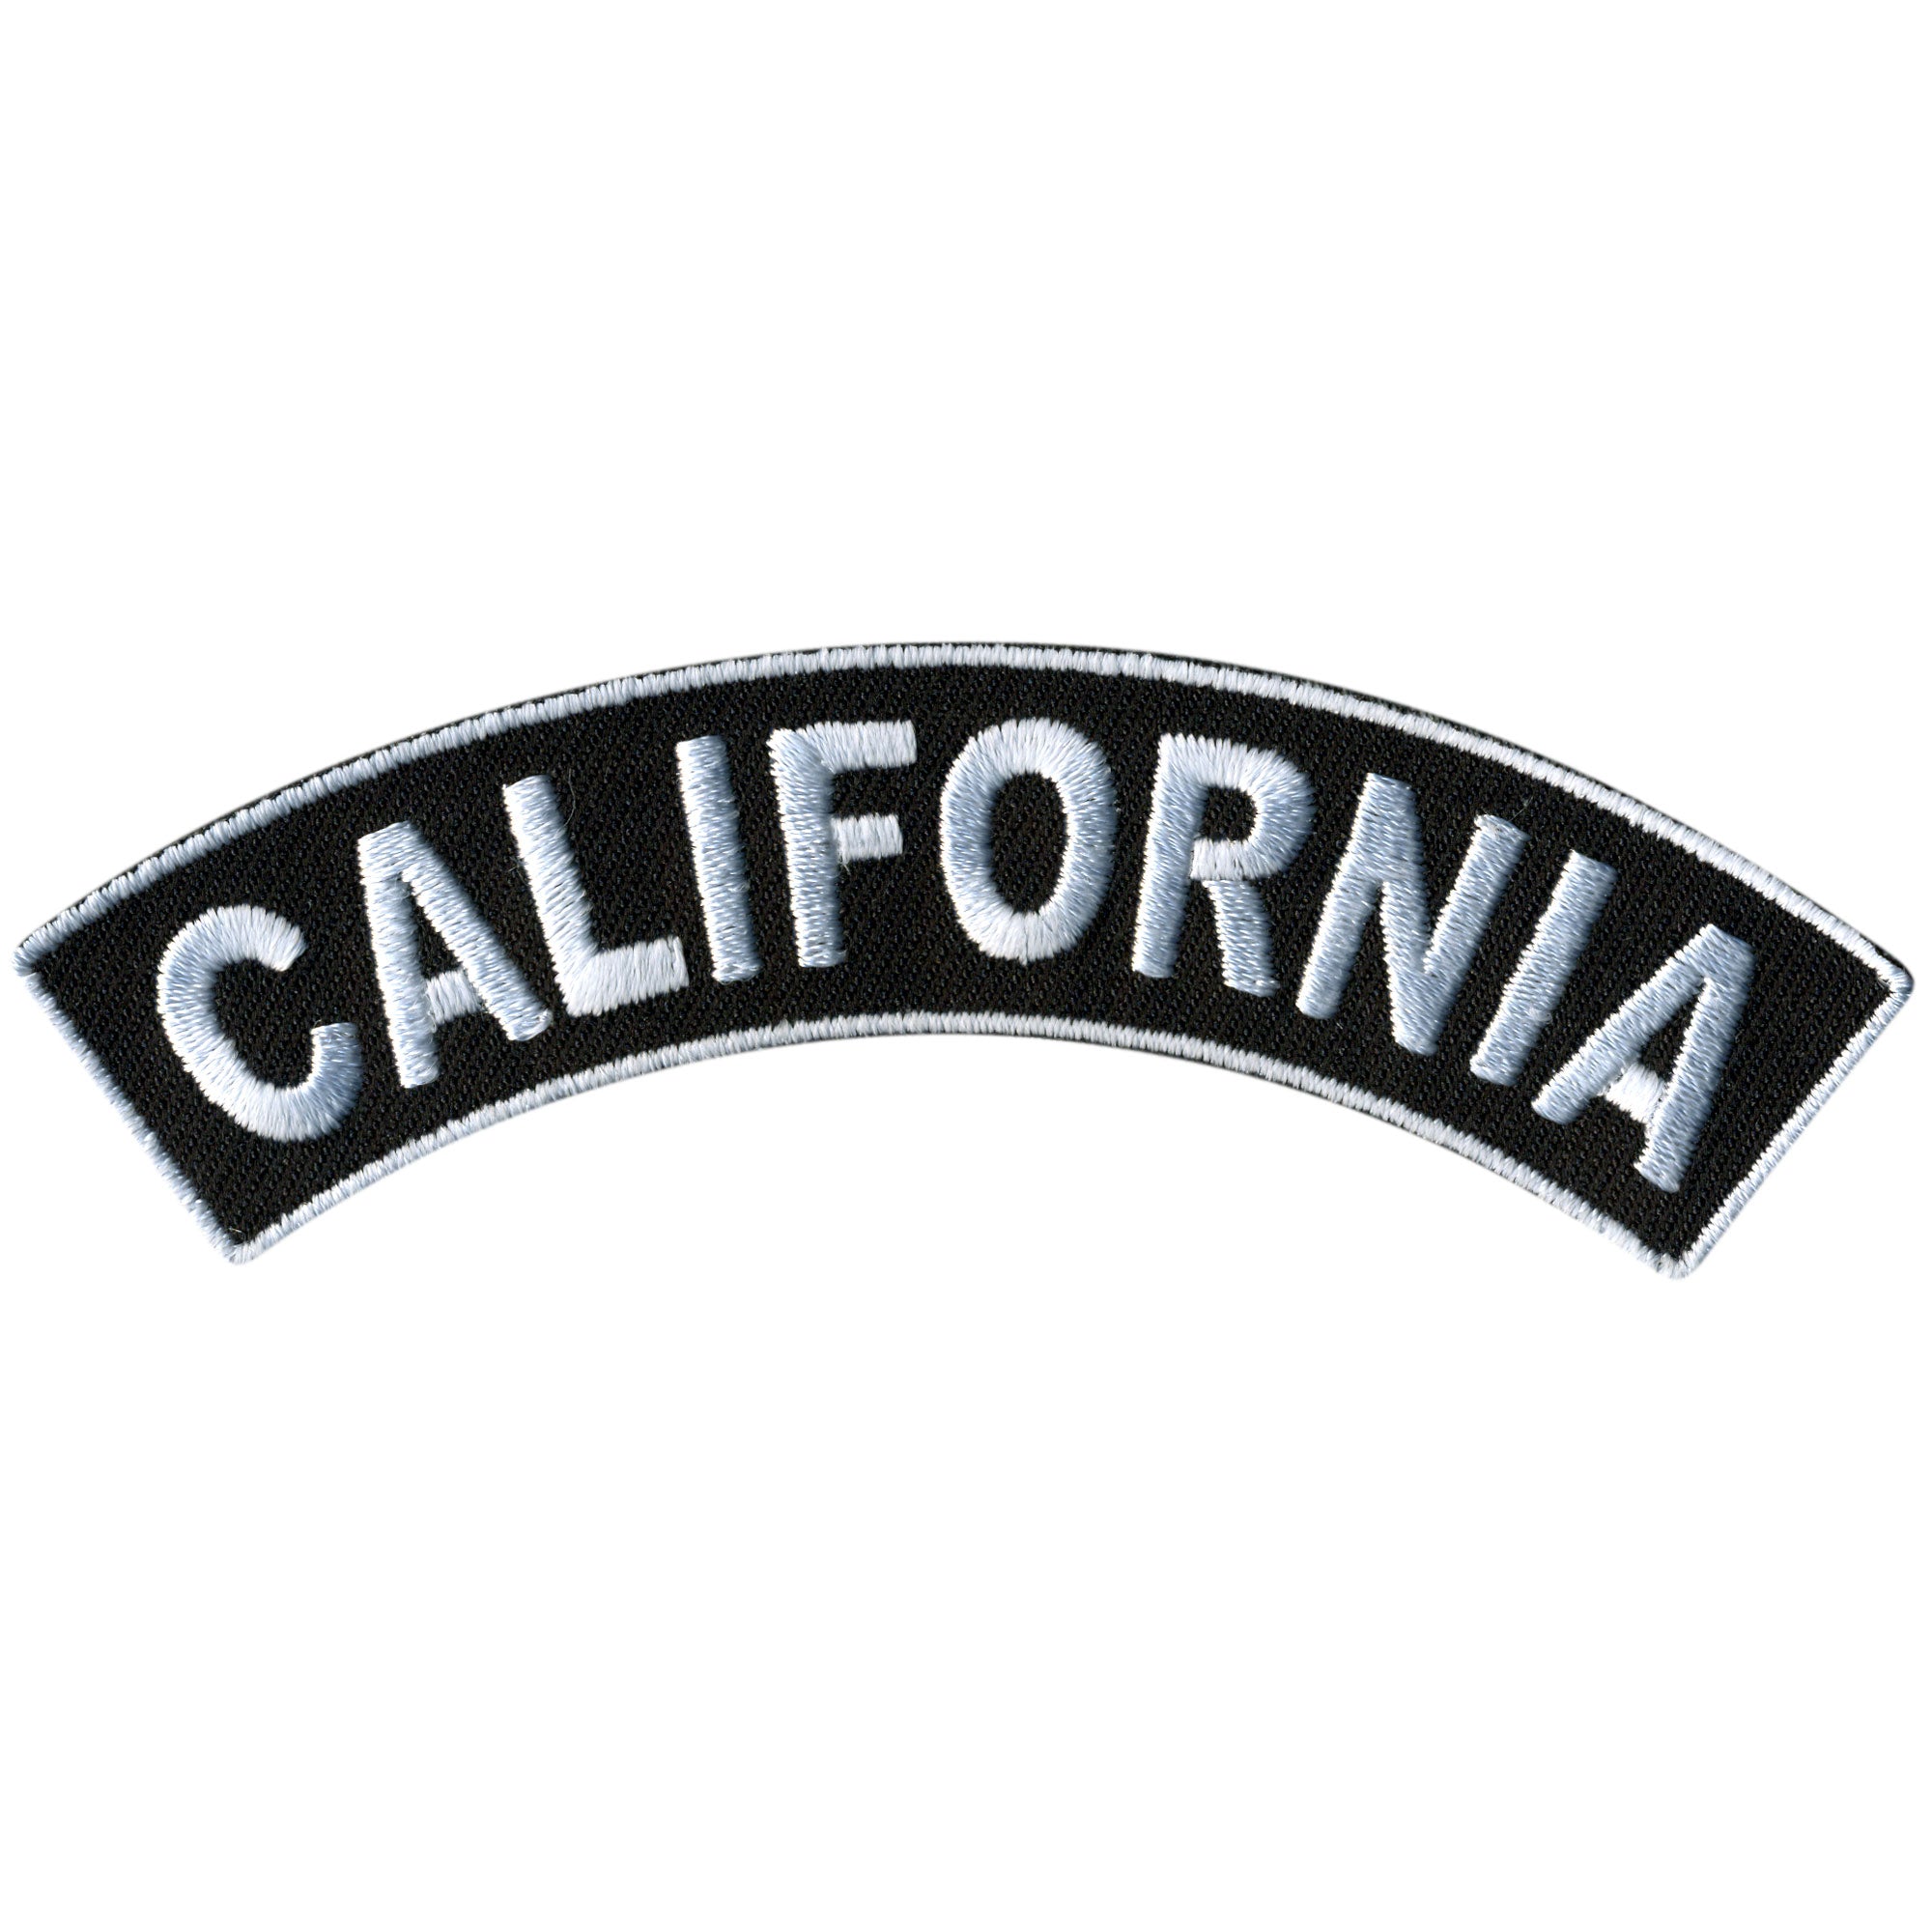 Hot Leathers California 4” X 1” Top Rocker Patch